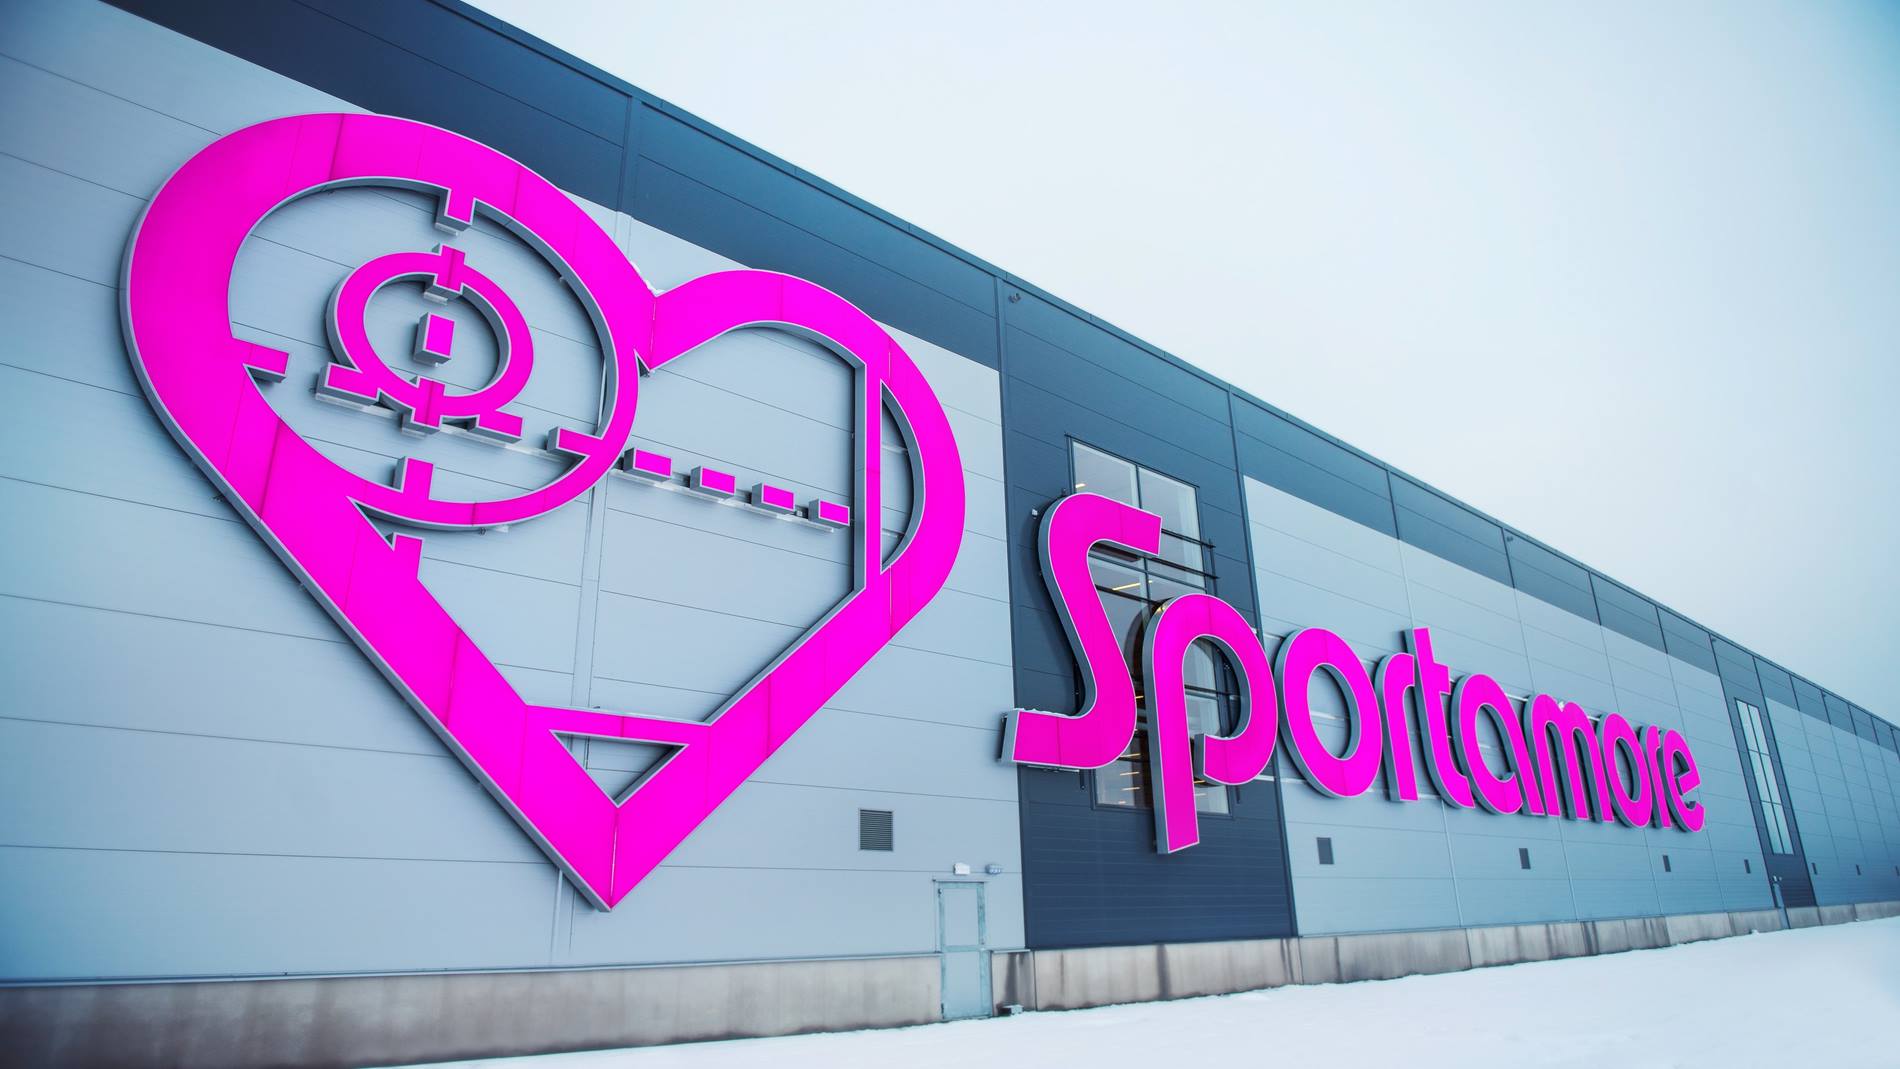 Sportamore is growing with expanded automated warehouses - Swisslog